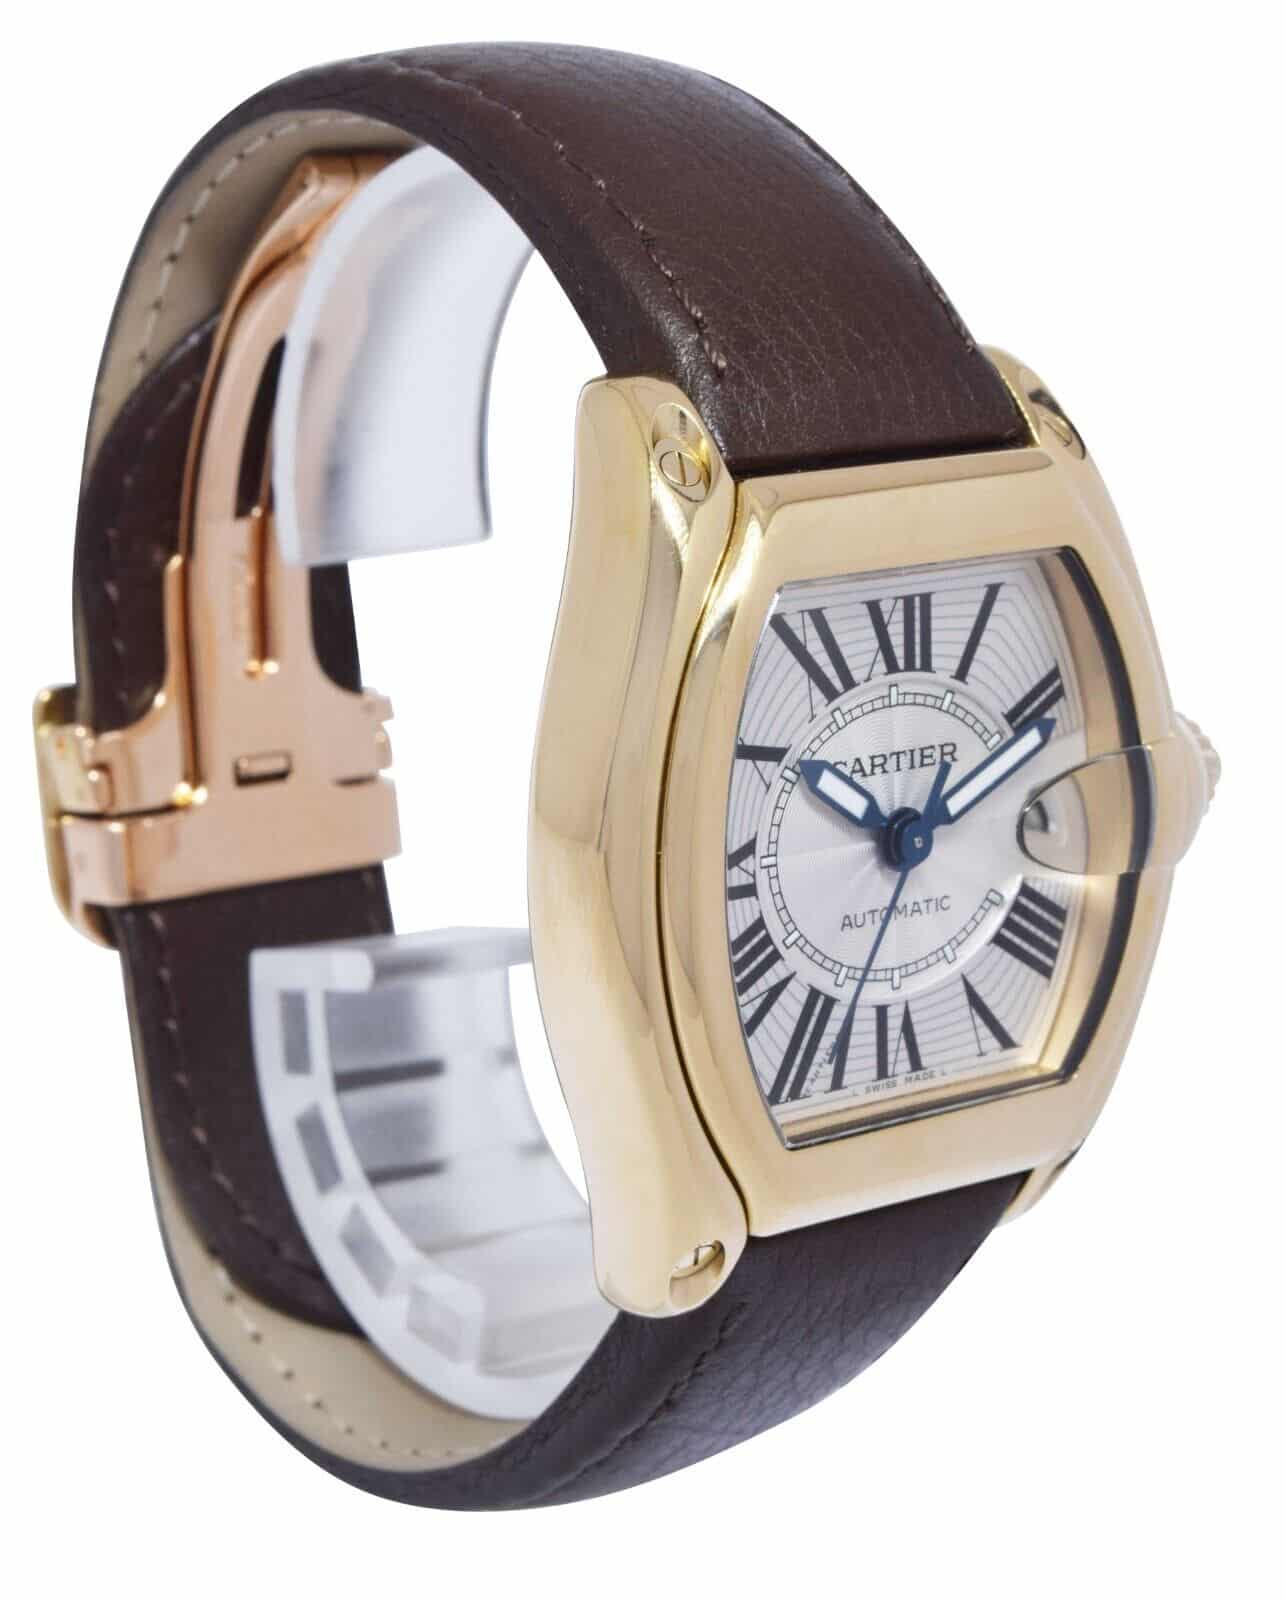 Cartier Roadster Watches From SwissLuxury-sonthuy.vn